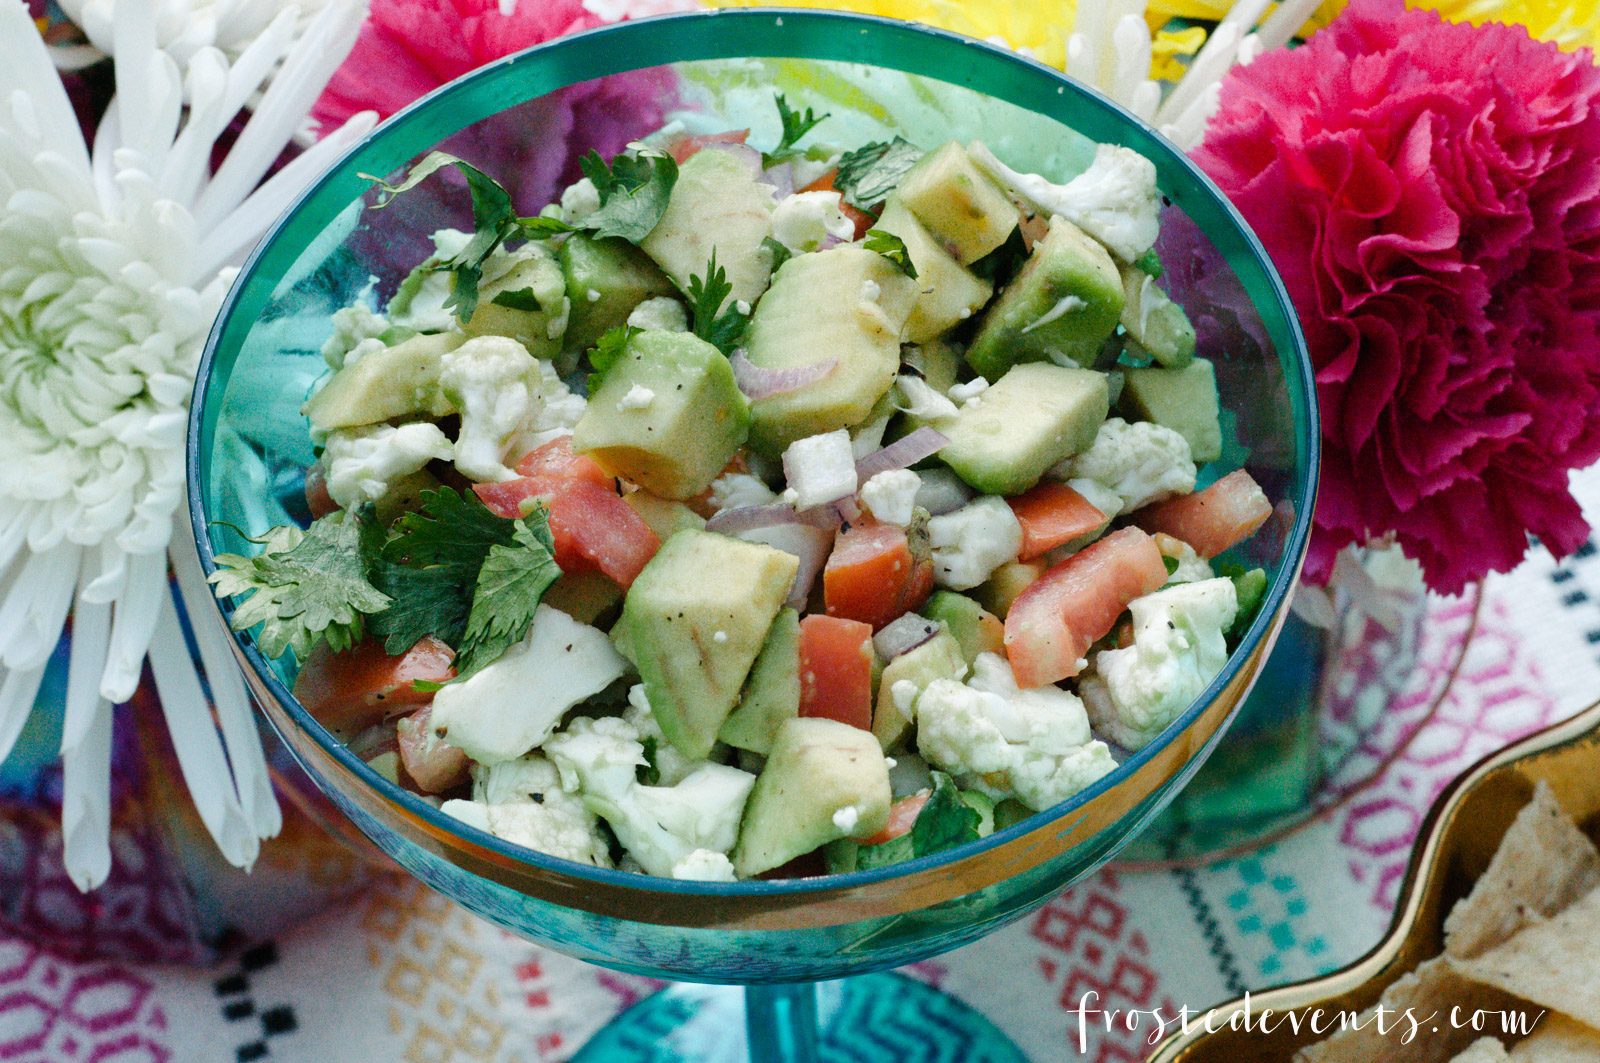 Avocados Recipes That Please a Party Crowd - Party Food, Healthy Fats and Summer Recipes 